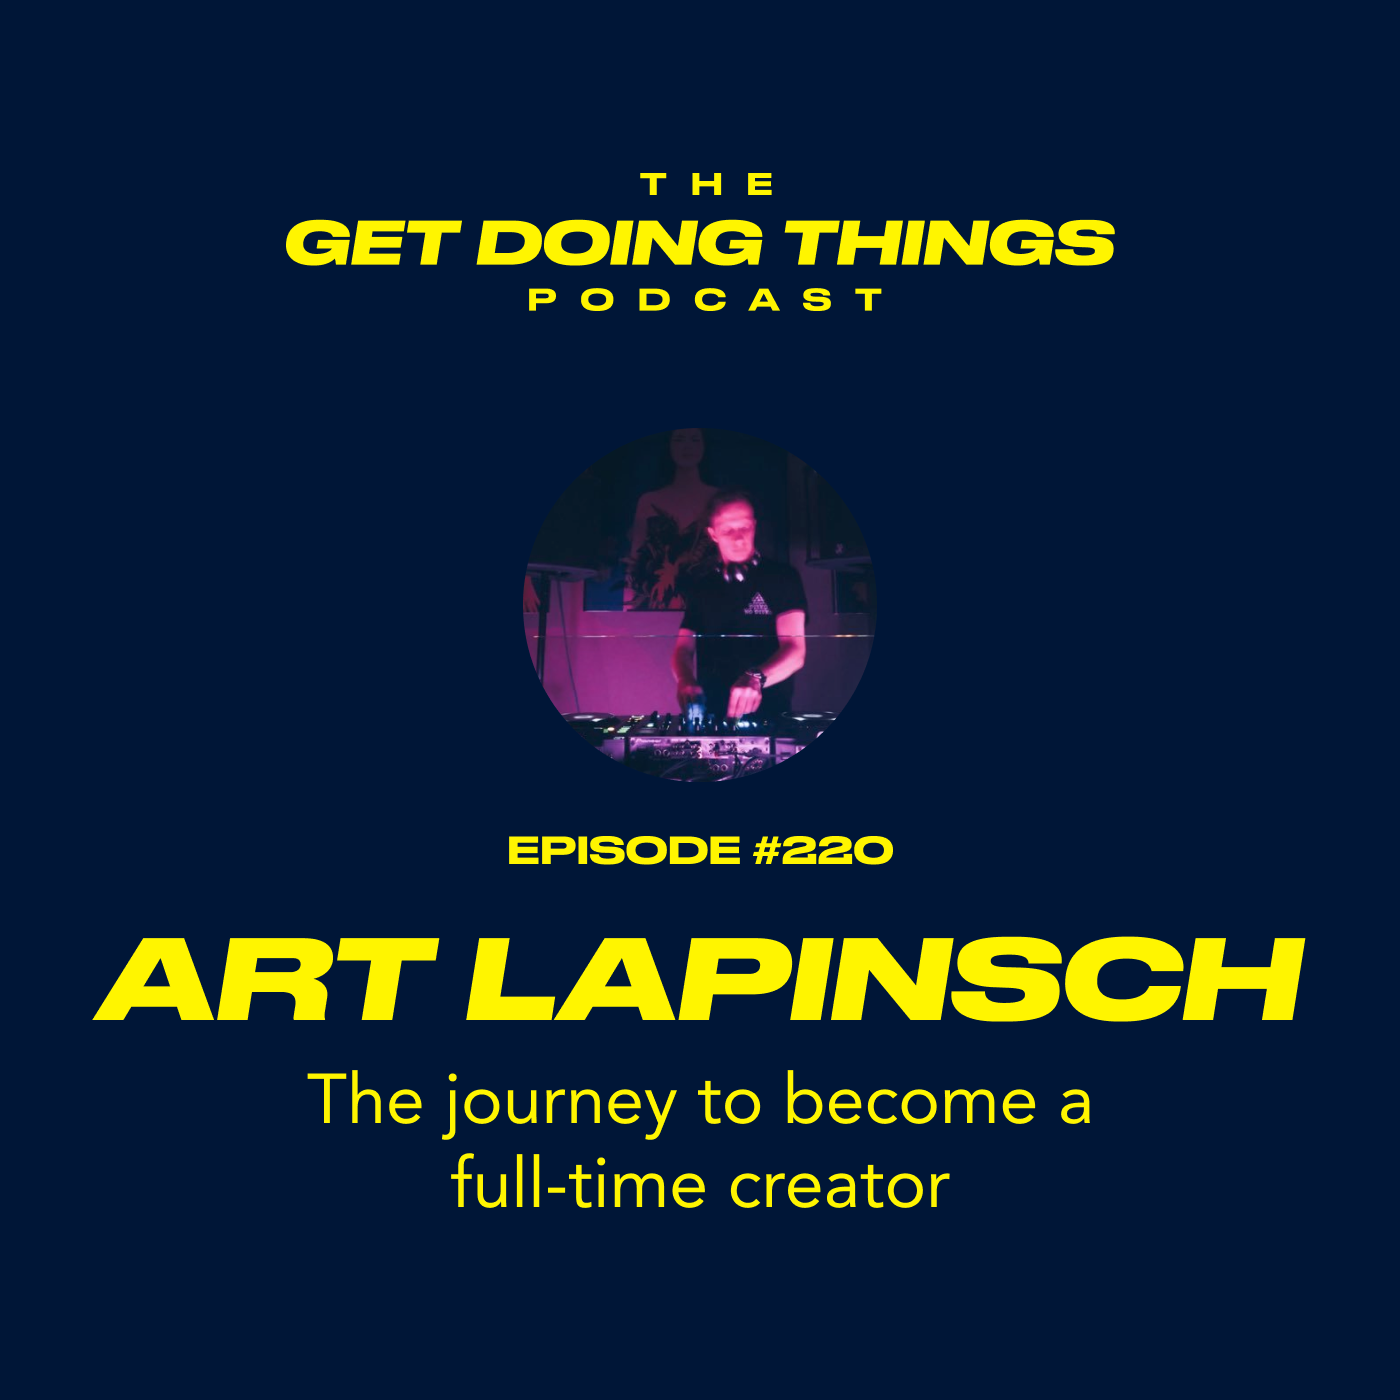 Art Lapinsch - The journey to become a full-time creator